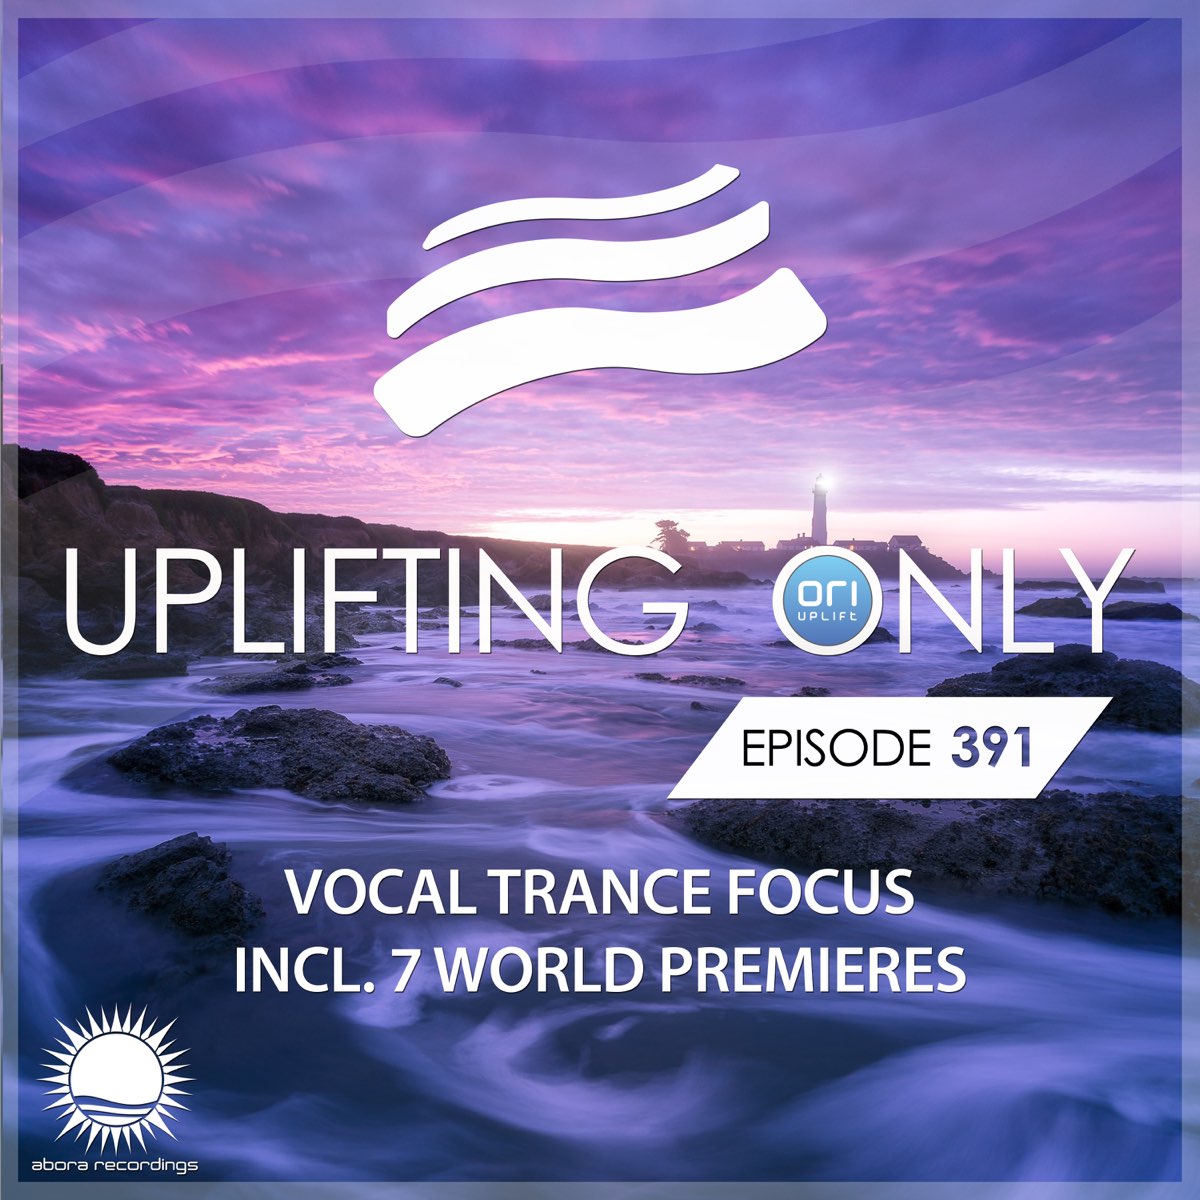 Uplifting. Uplifting only Episode 569 Vocal Trance Focus. Simply Drew & Sara Fray – Fishes. Only ep